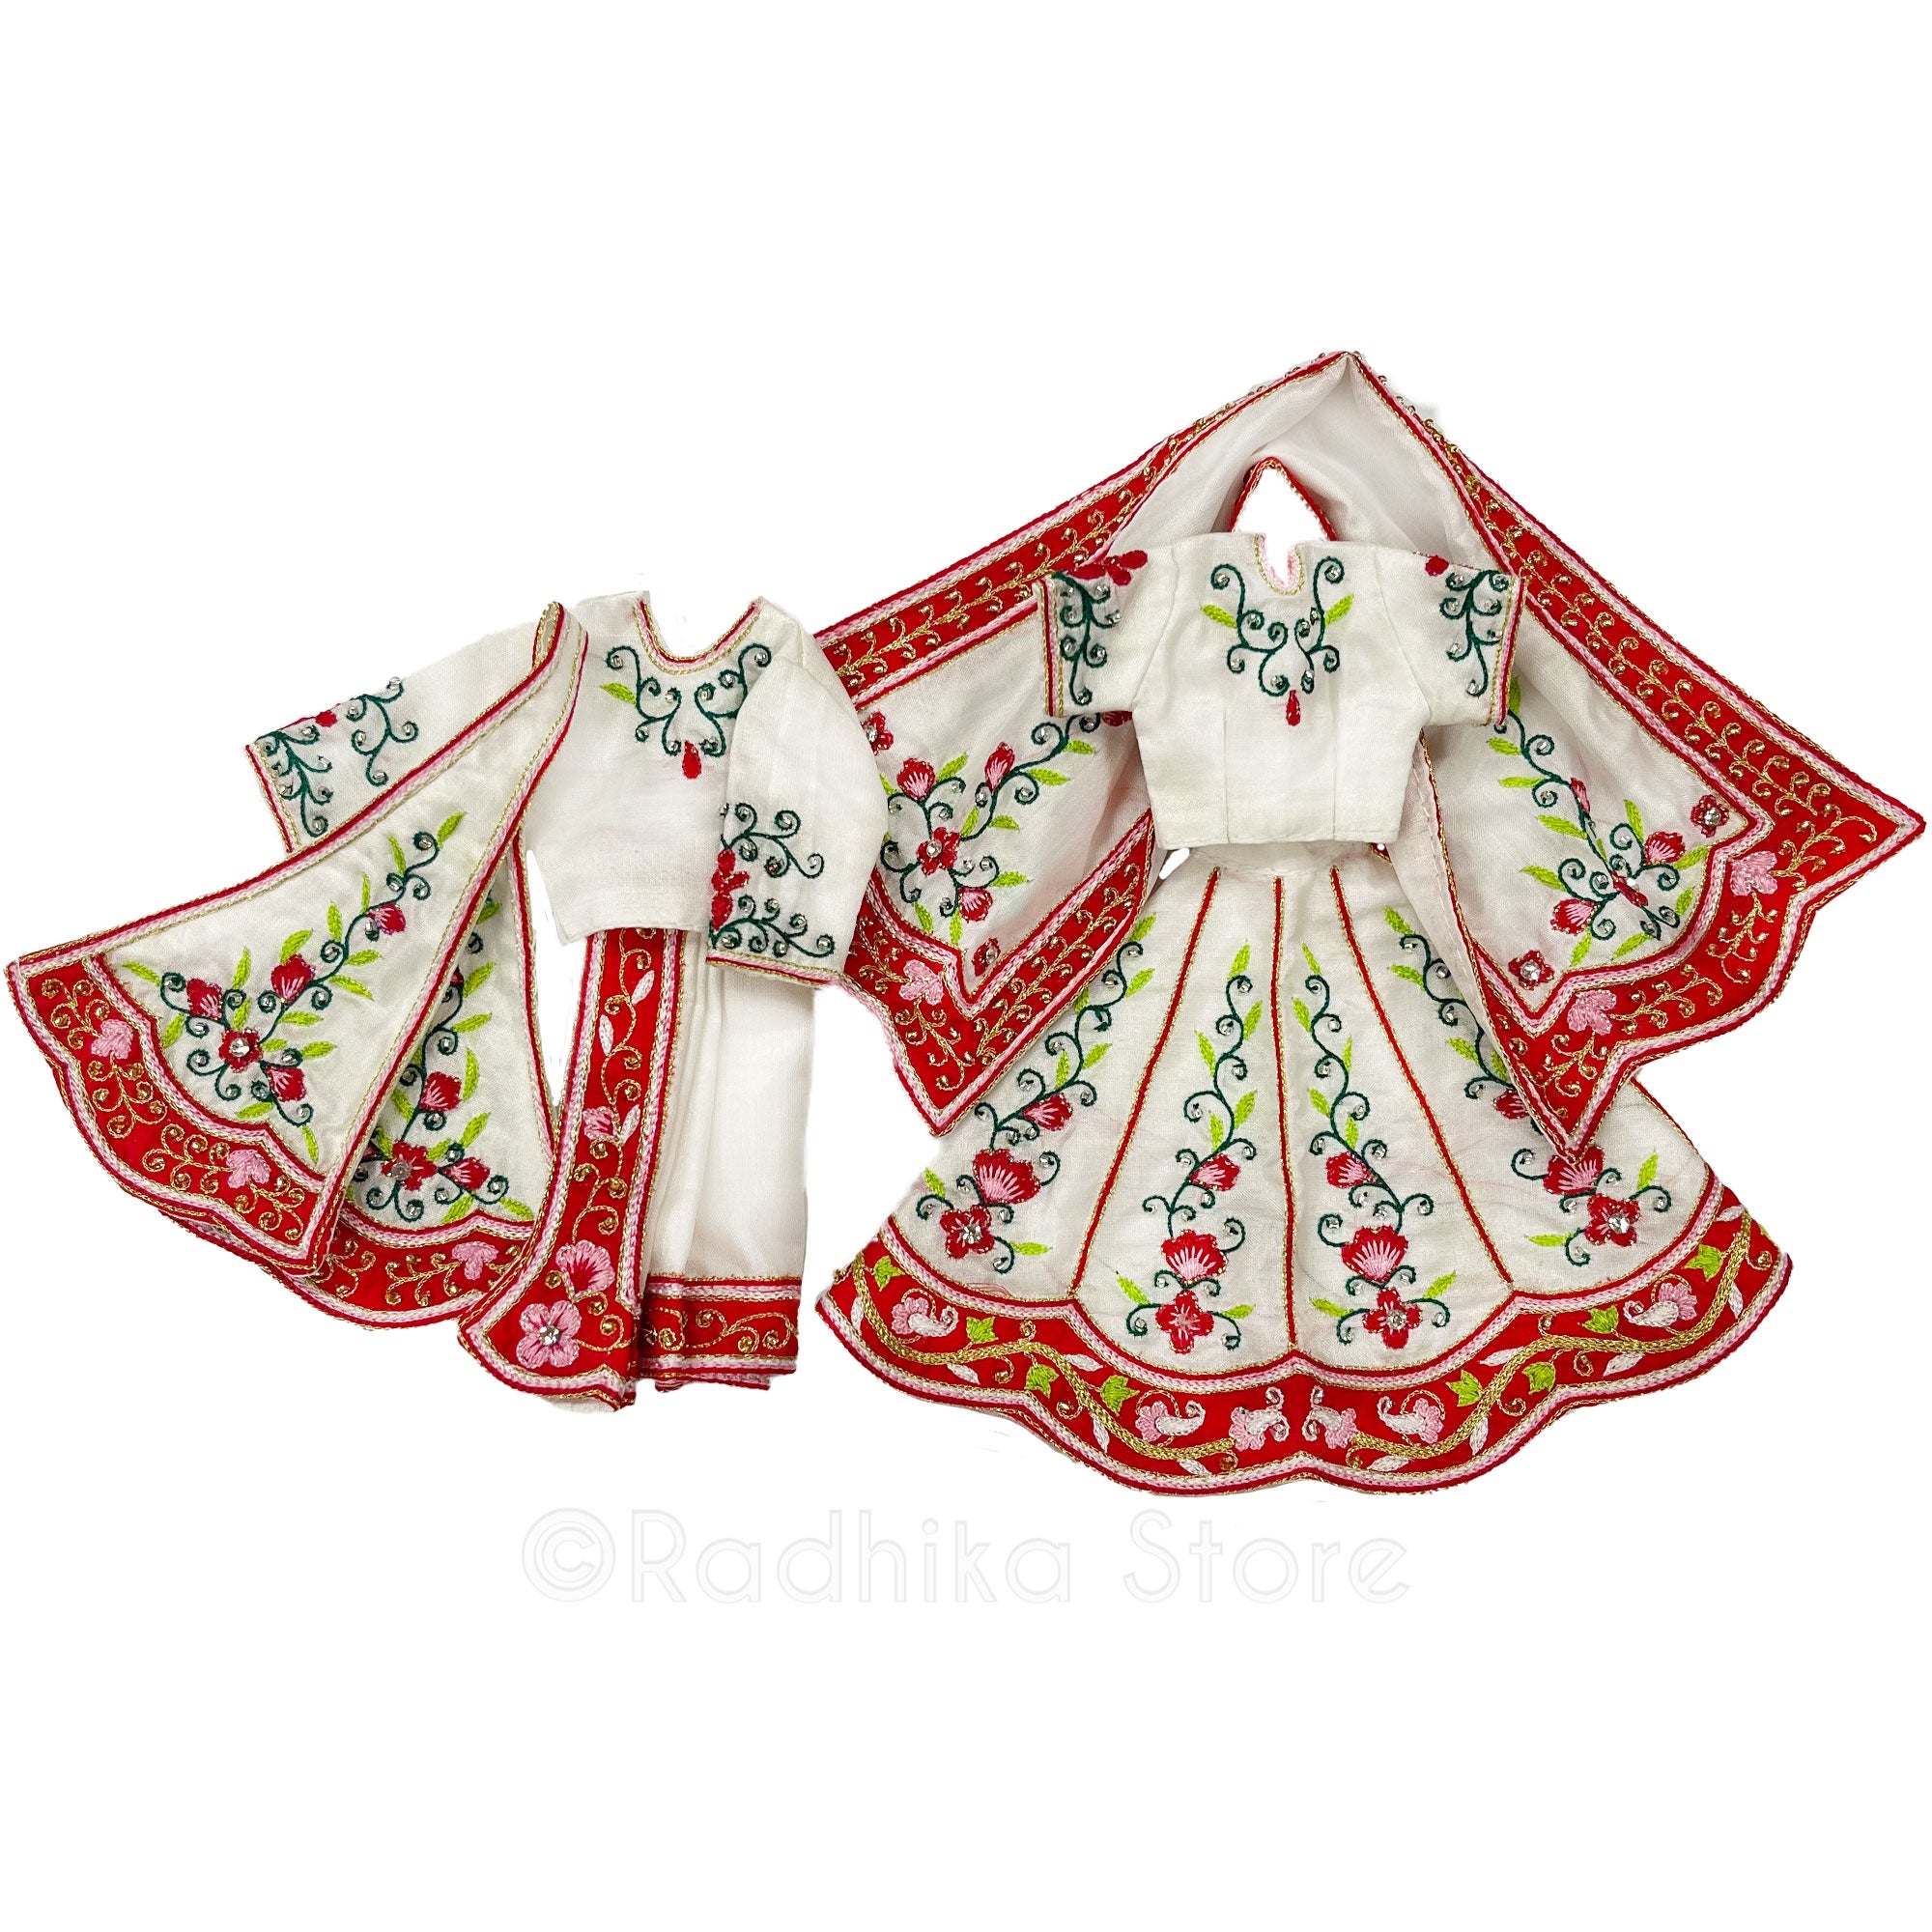 Madhuram Sweetness -  All Silk - White With Red Pink and Greens - Radha Krishna Deity Outfit